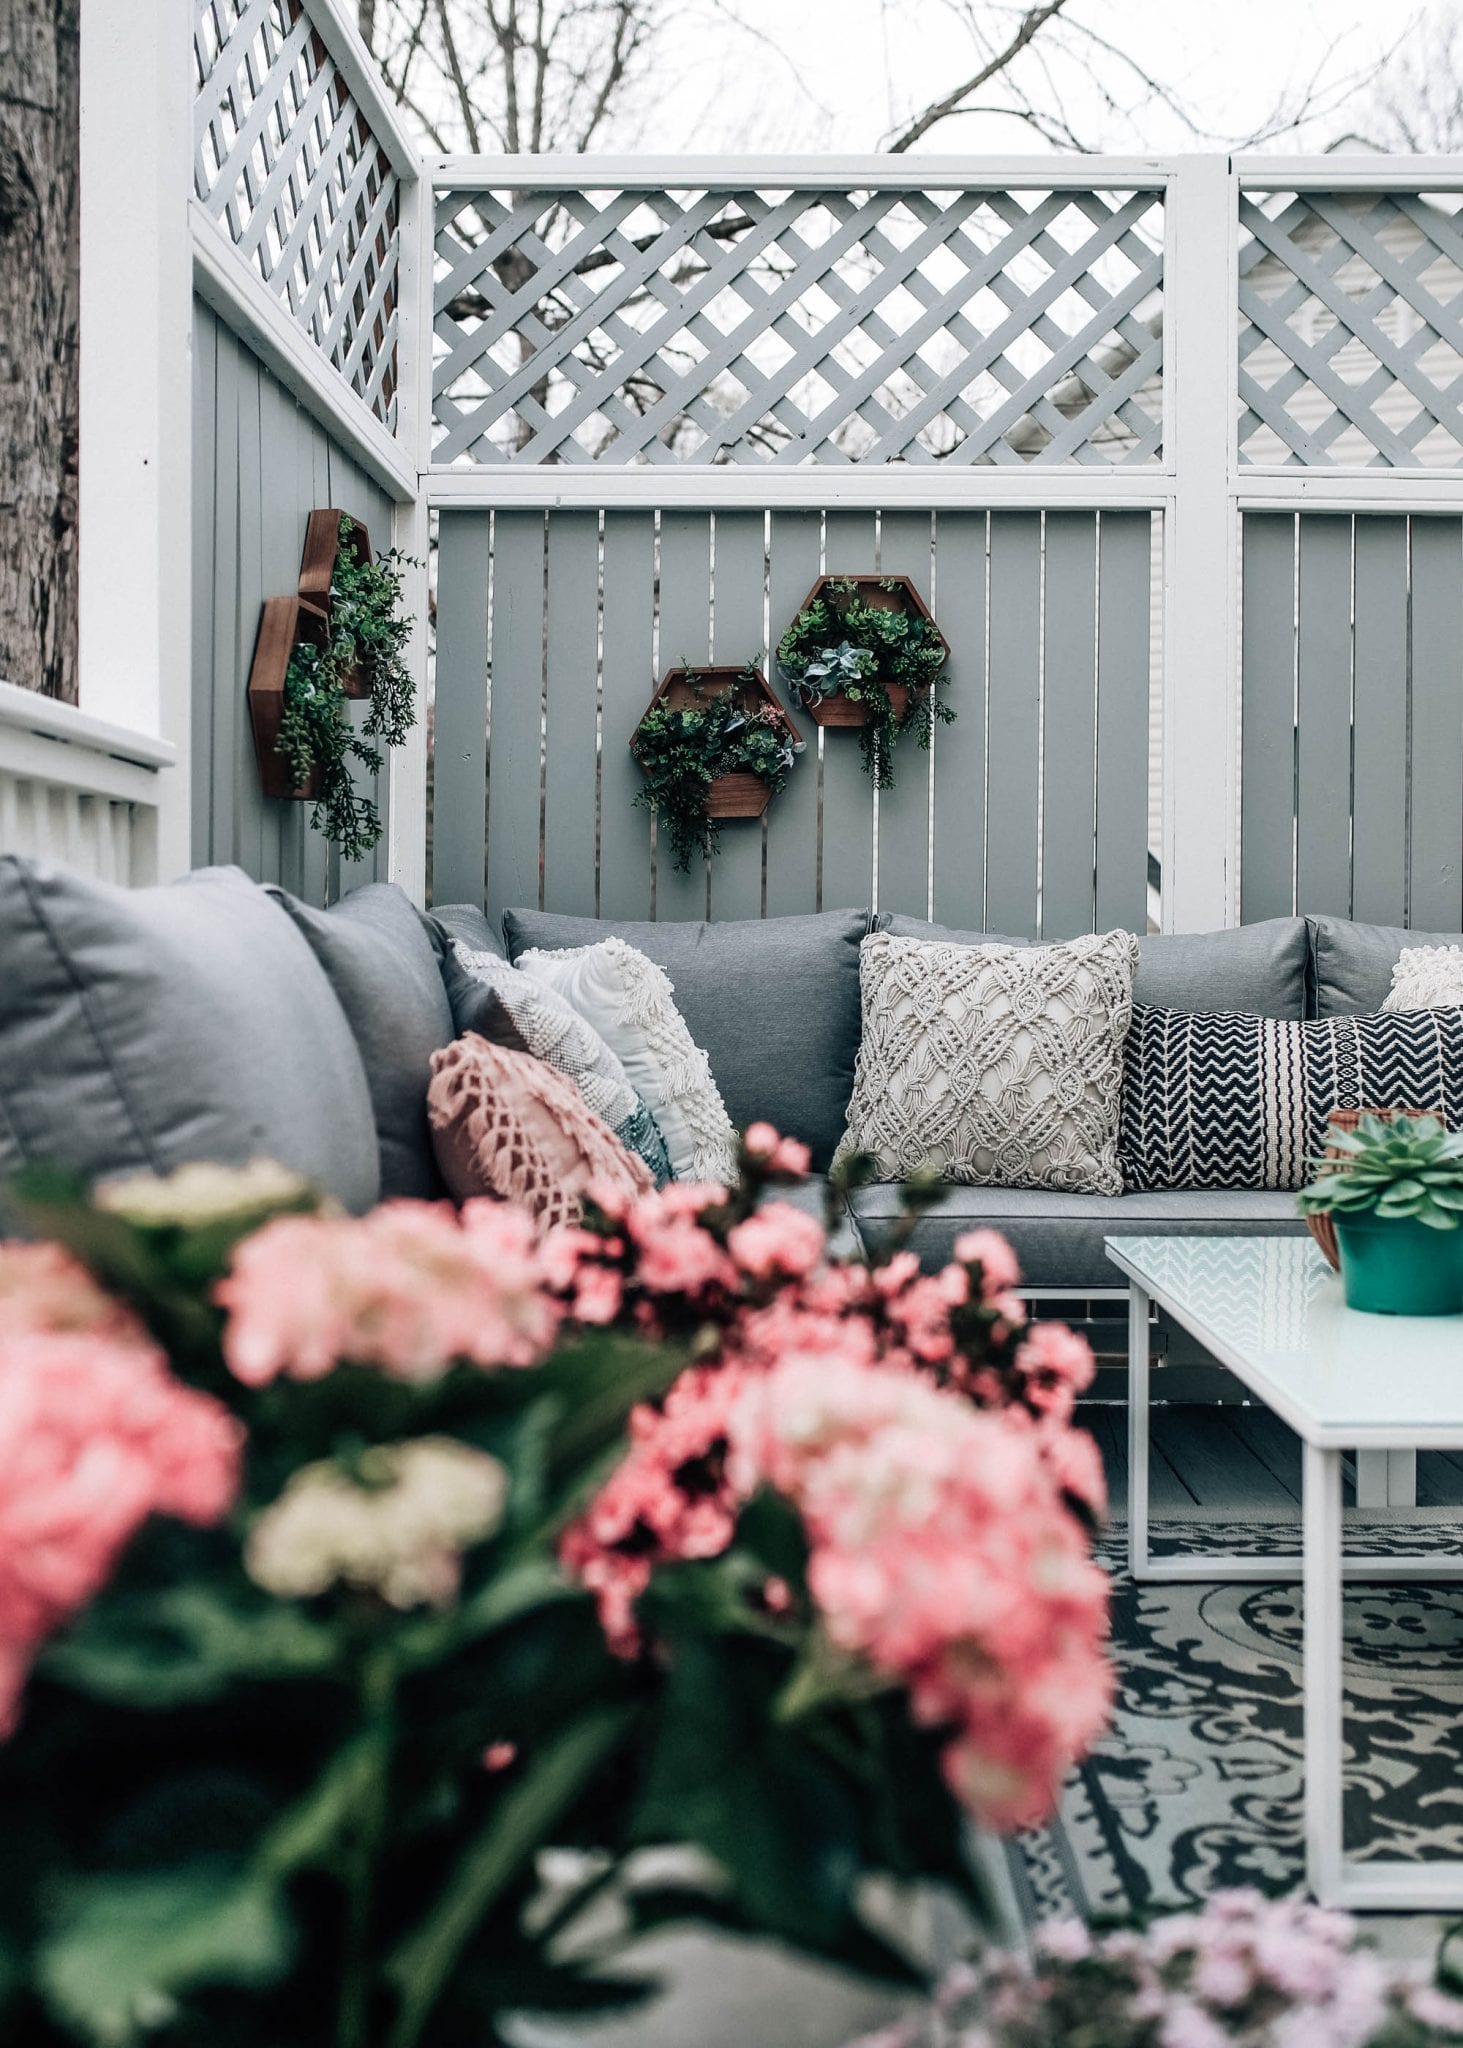 Decorating Our Outdoor Space: Part I